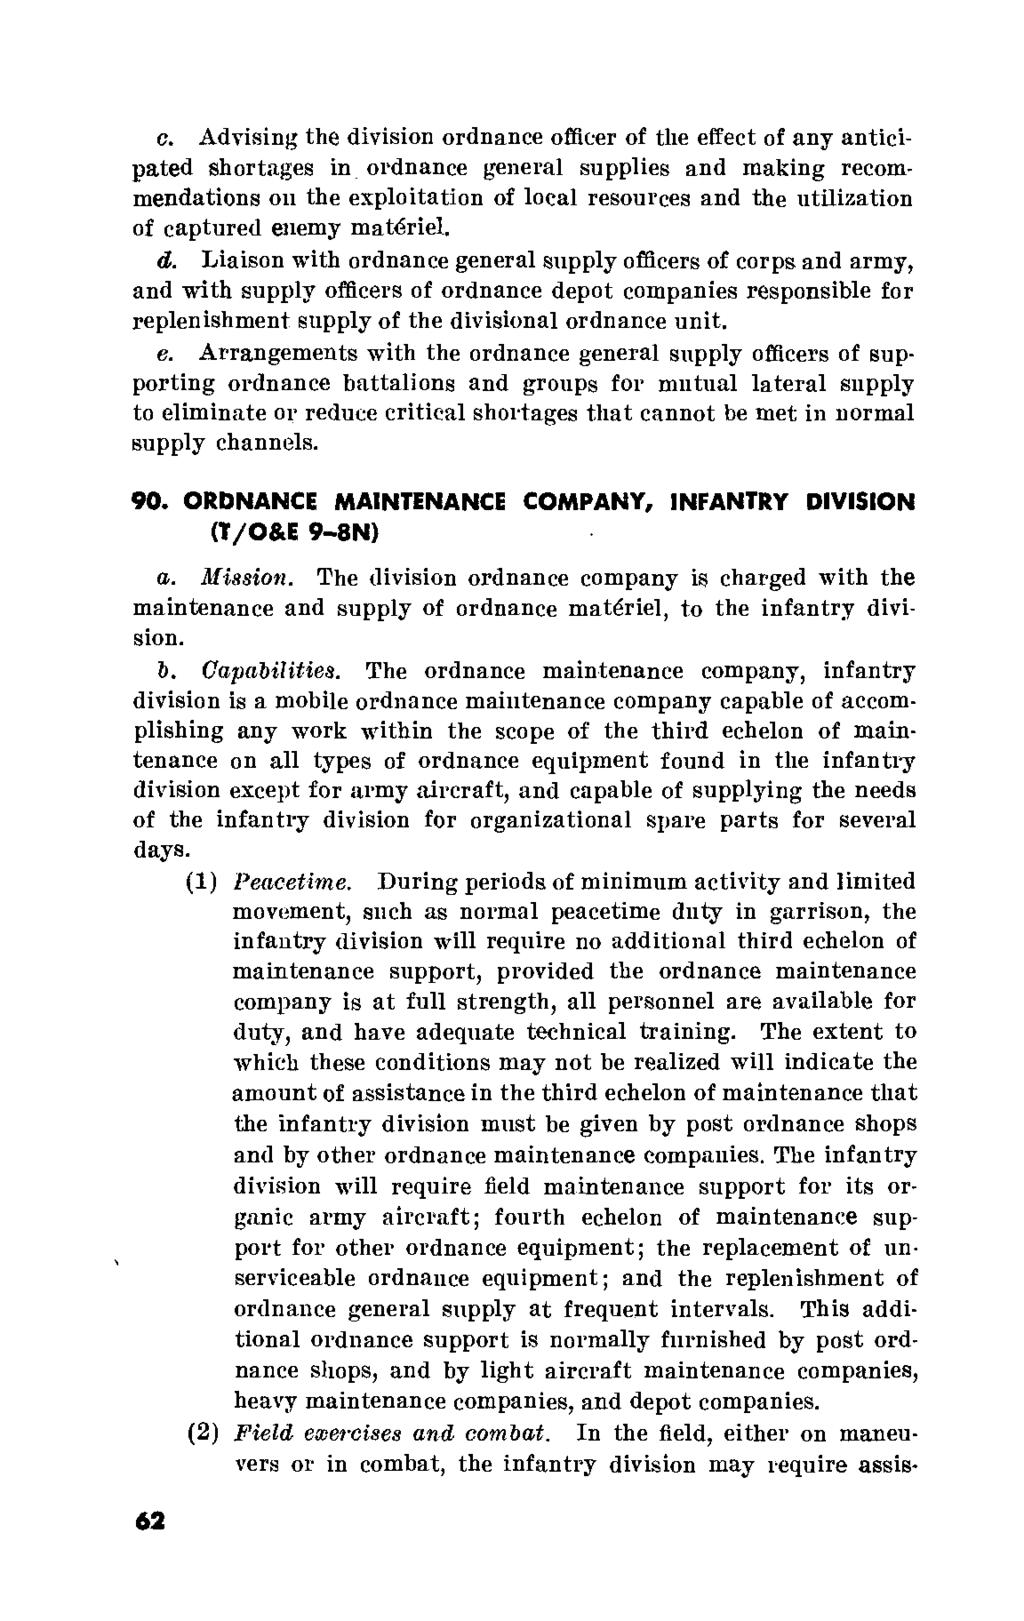 c. Advising the division ordnance officer of the effect of any anticipated shortages in ordnance general supplies and making recommendations on the exploitation of local resources and the utilization